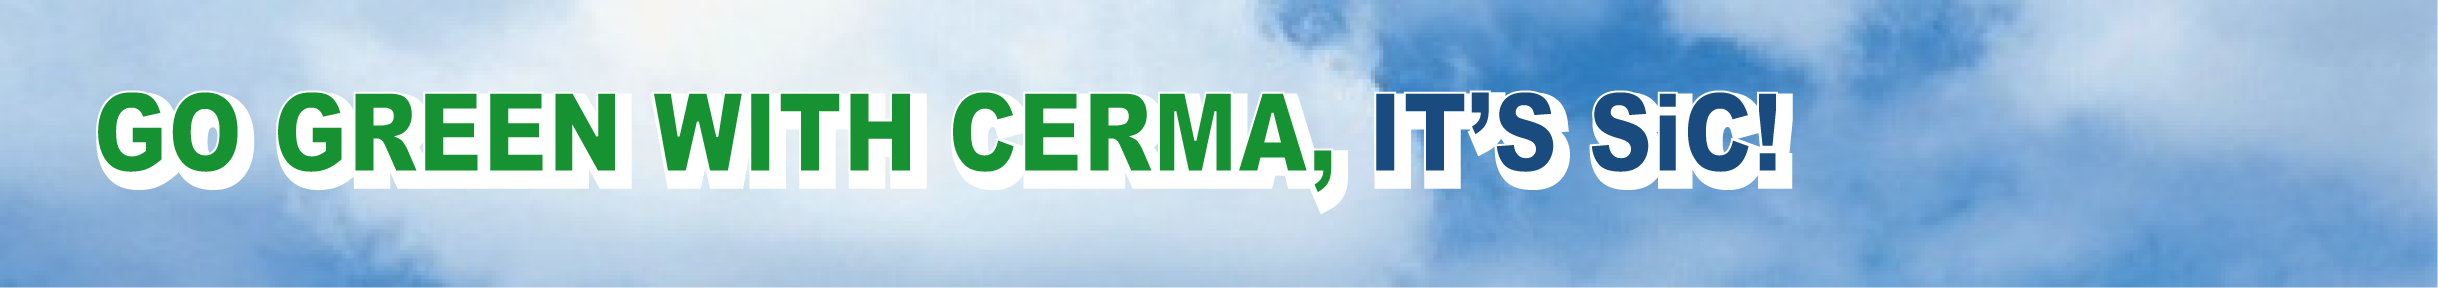 Go Green with Cerma